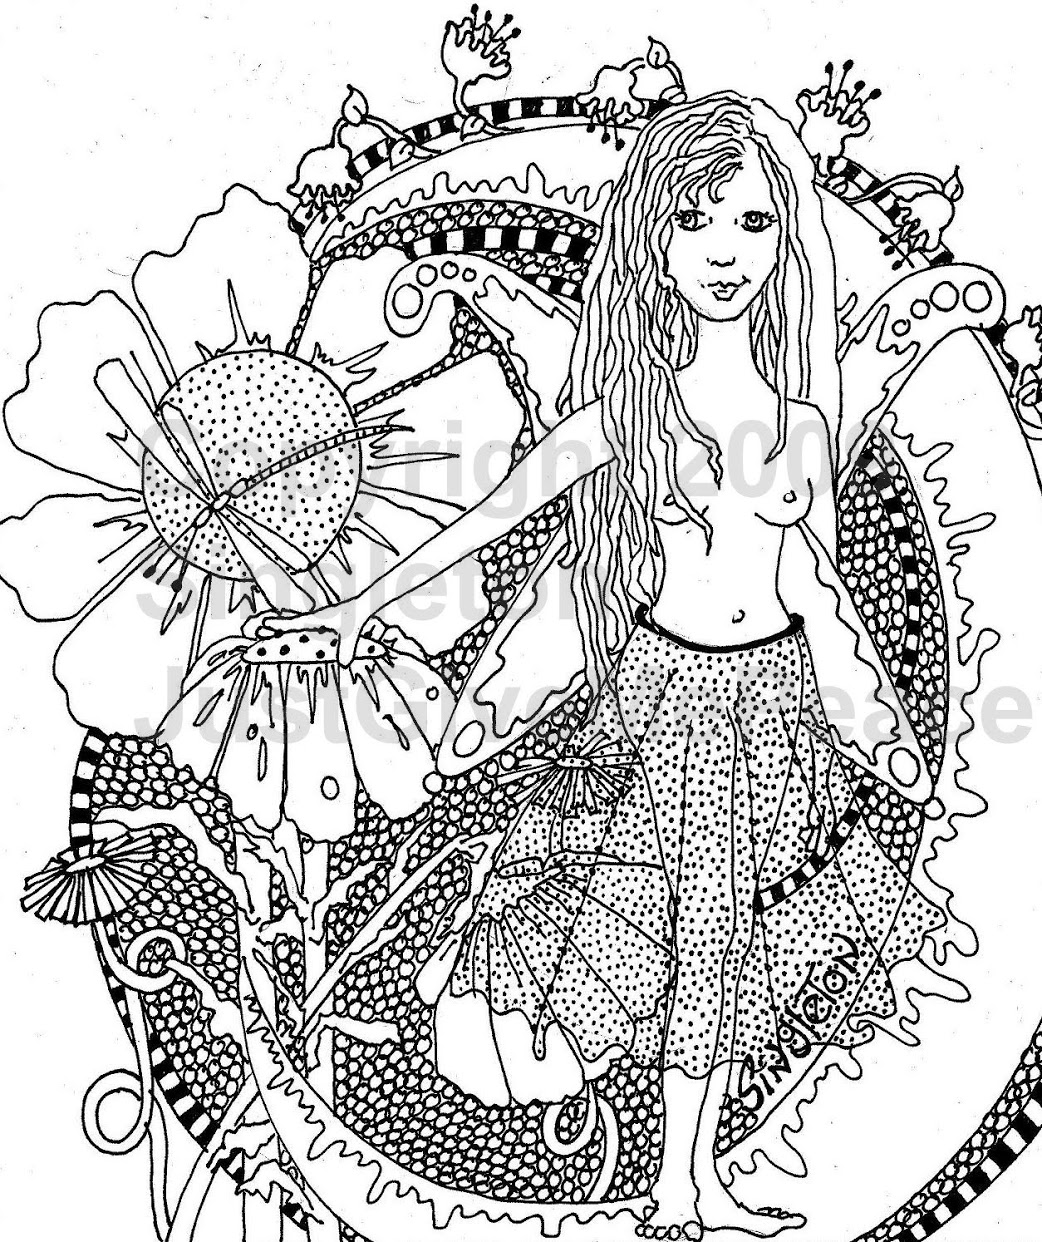 Hipster Coloring Pages At Free Printable Colorings Pages To Print And Color